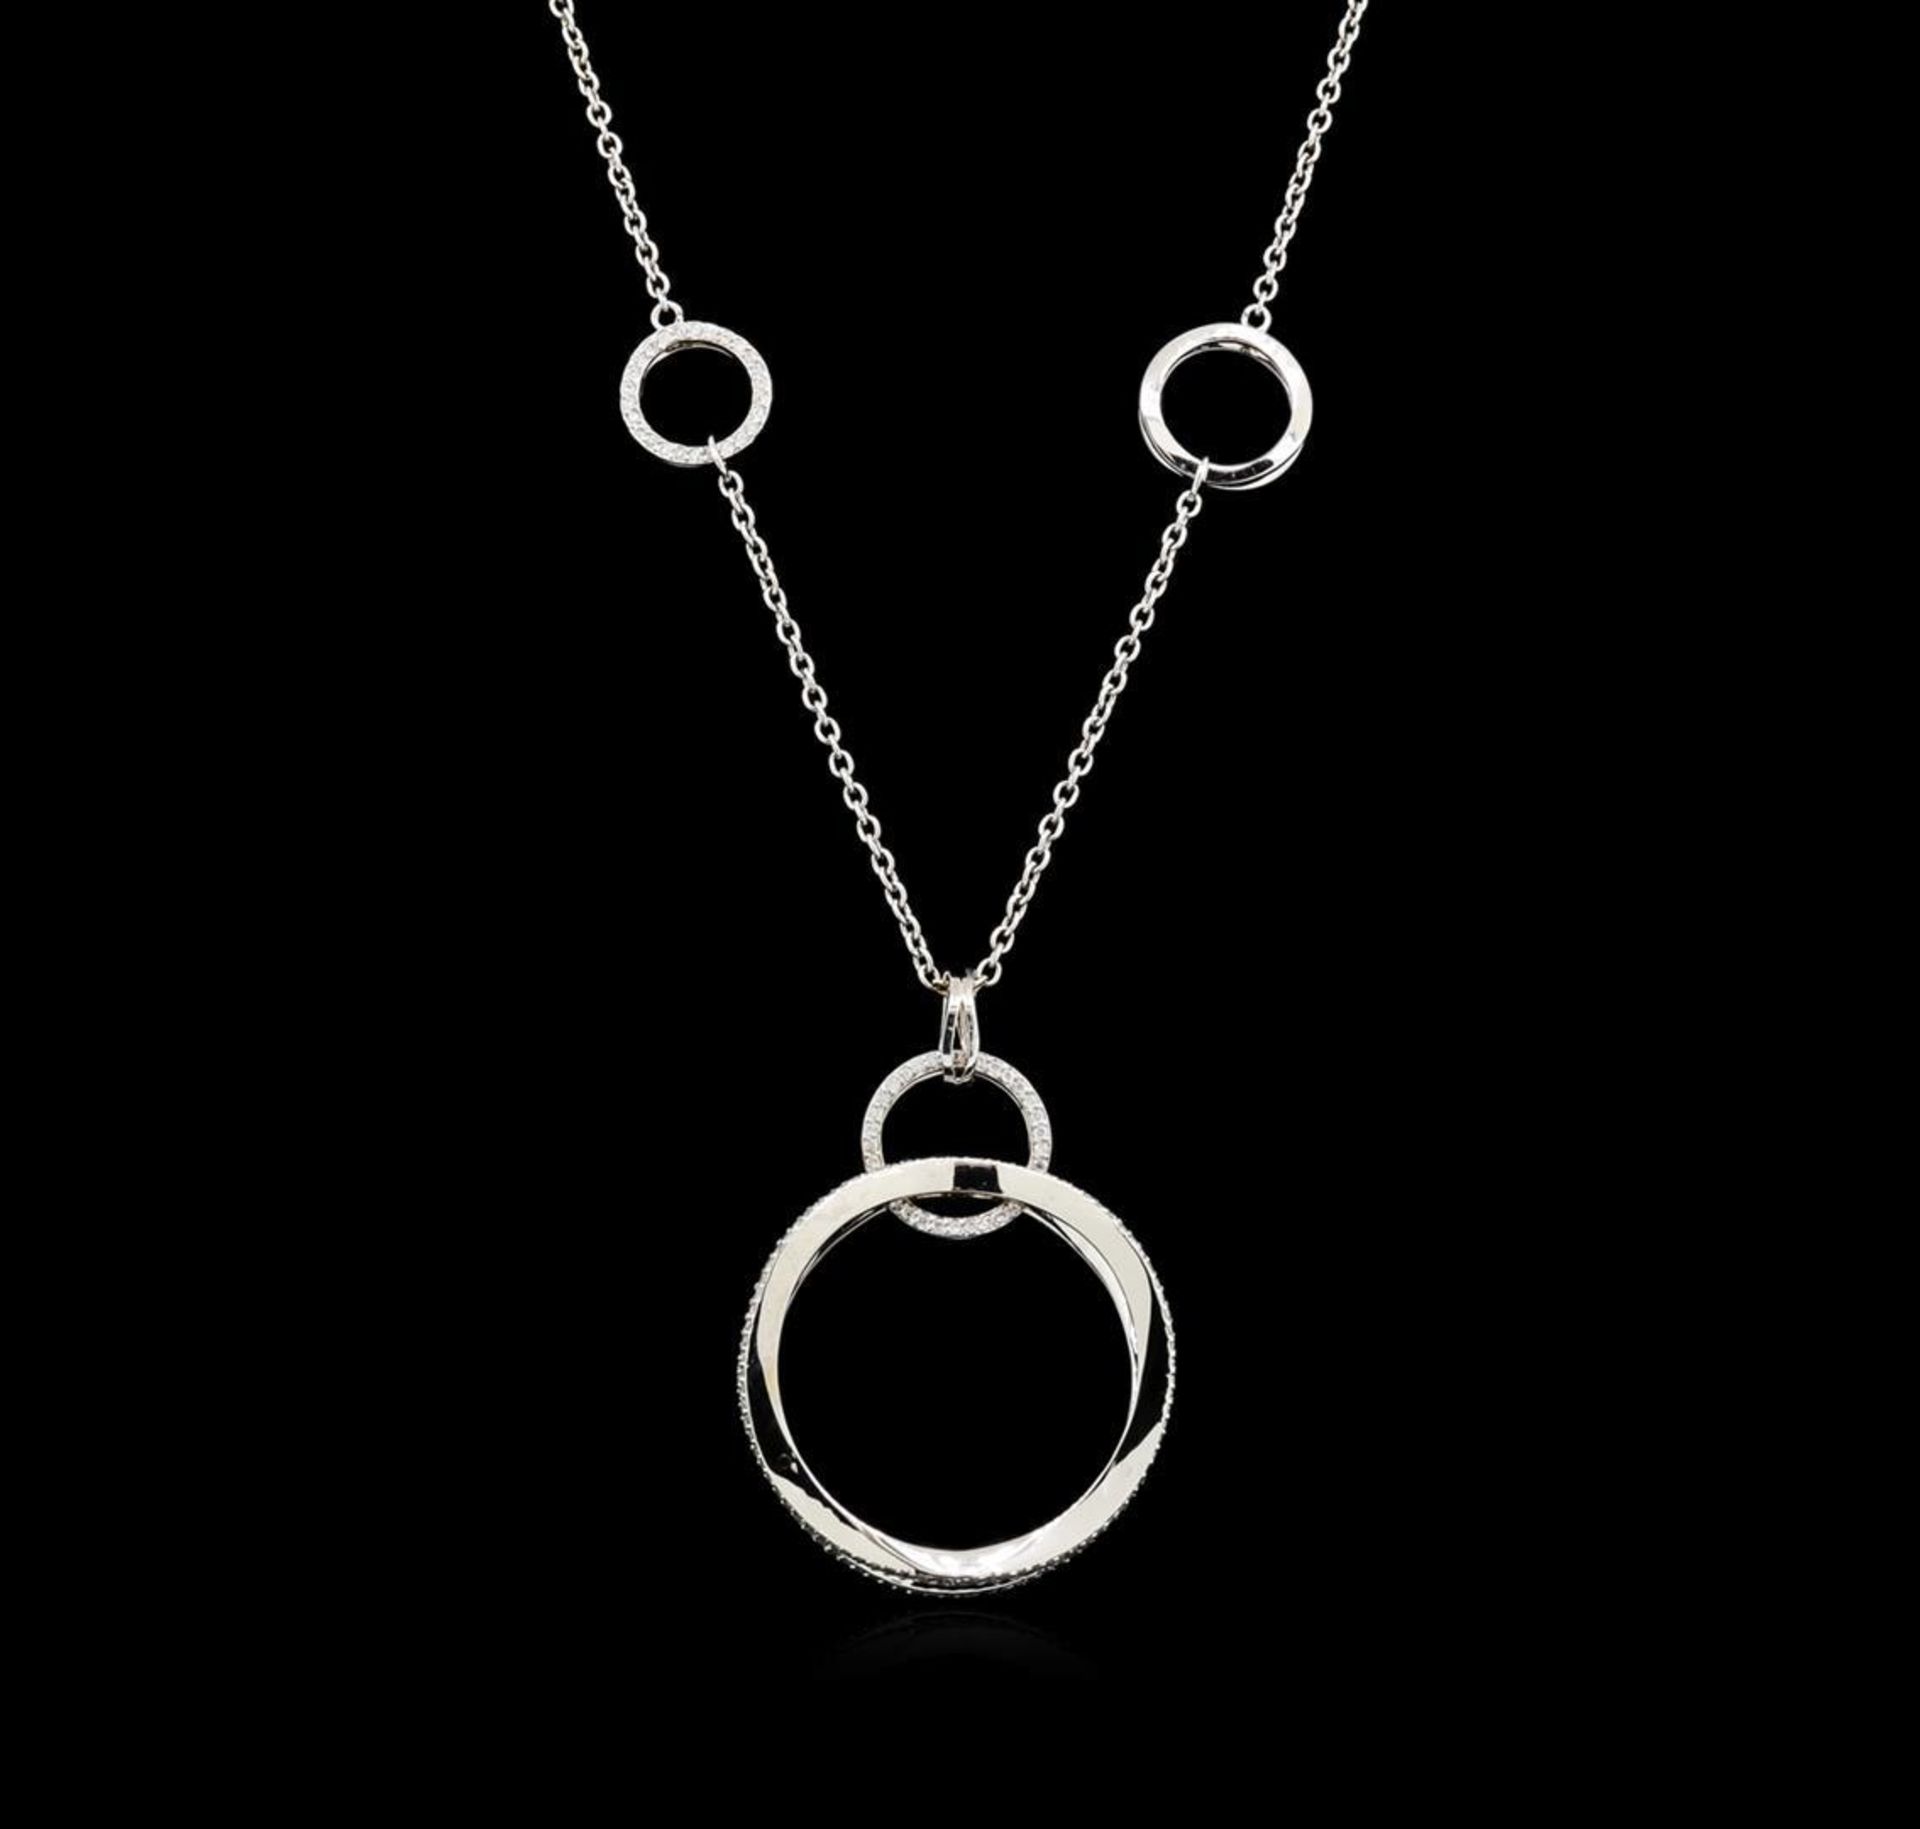 1.01 ctw Diamond Necklace - 14KT White Gold - Image 2 of 3